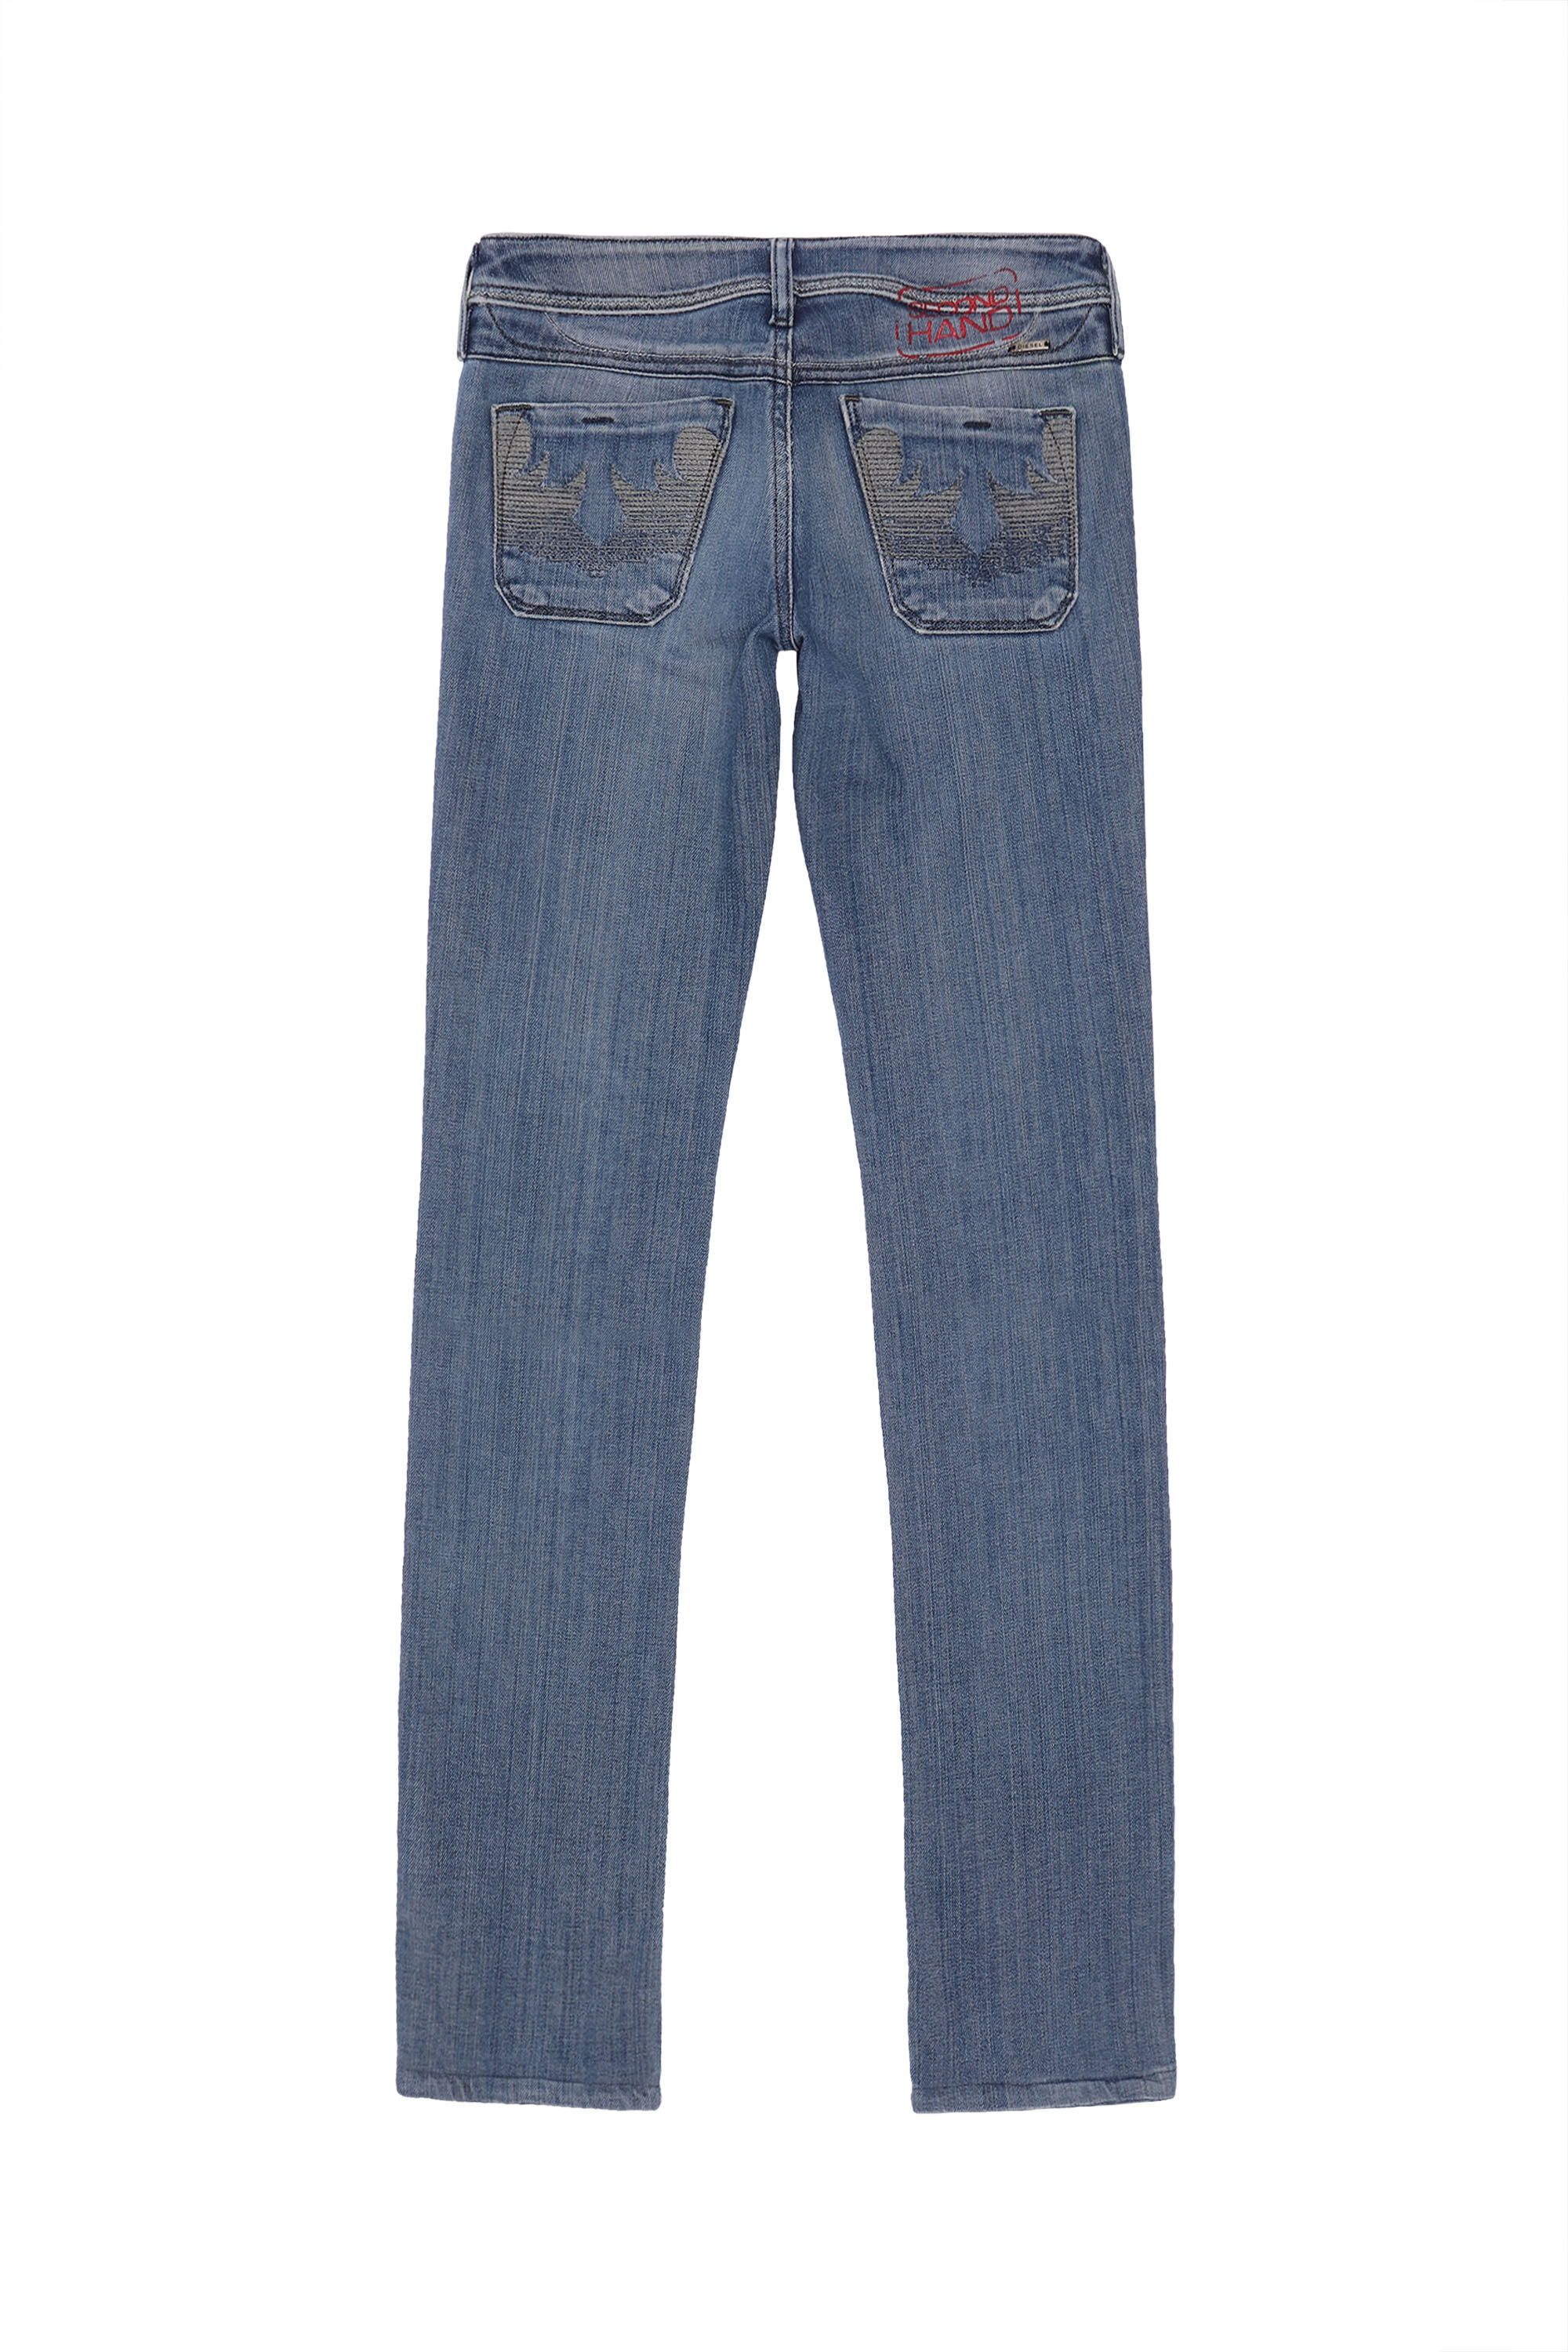 LOWKY Woman Jeans | Diesel Second Hand